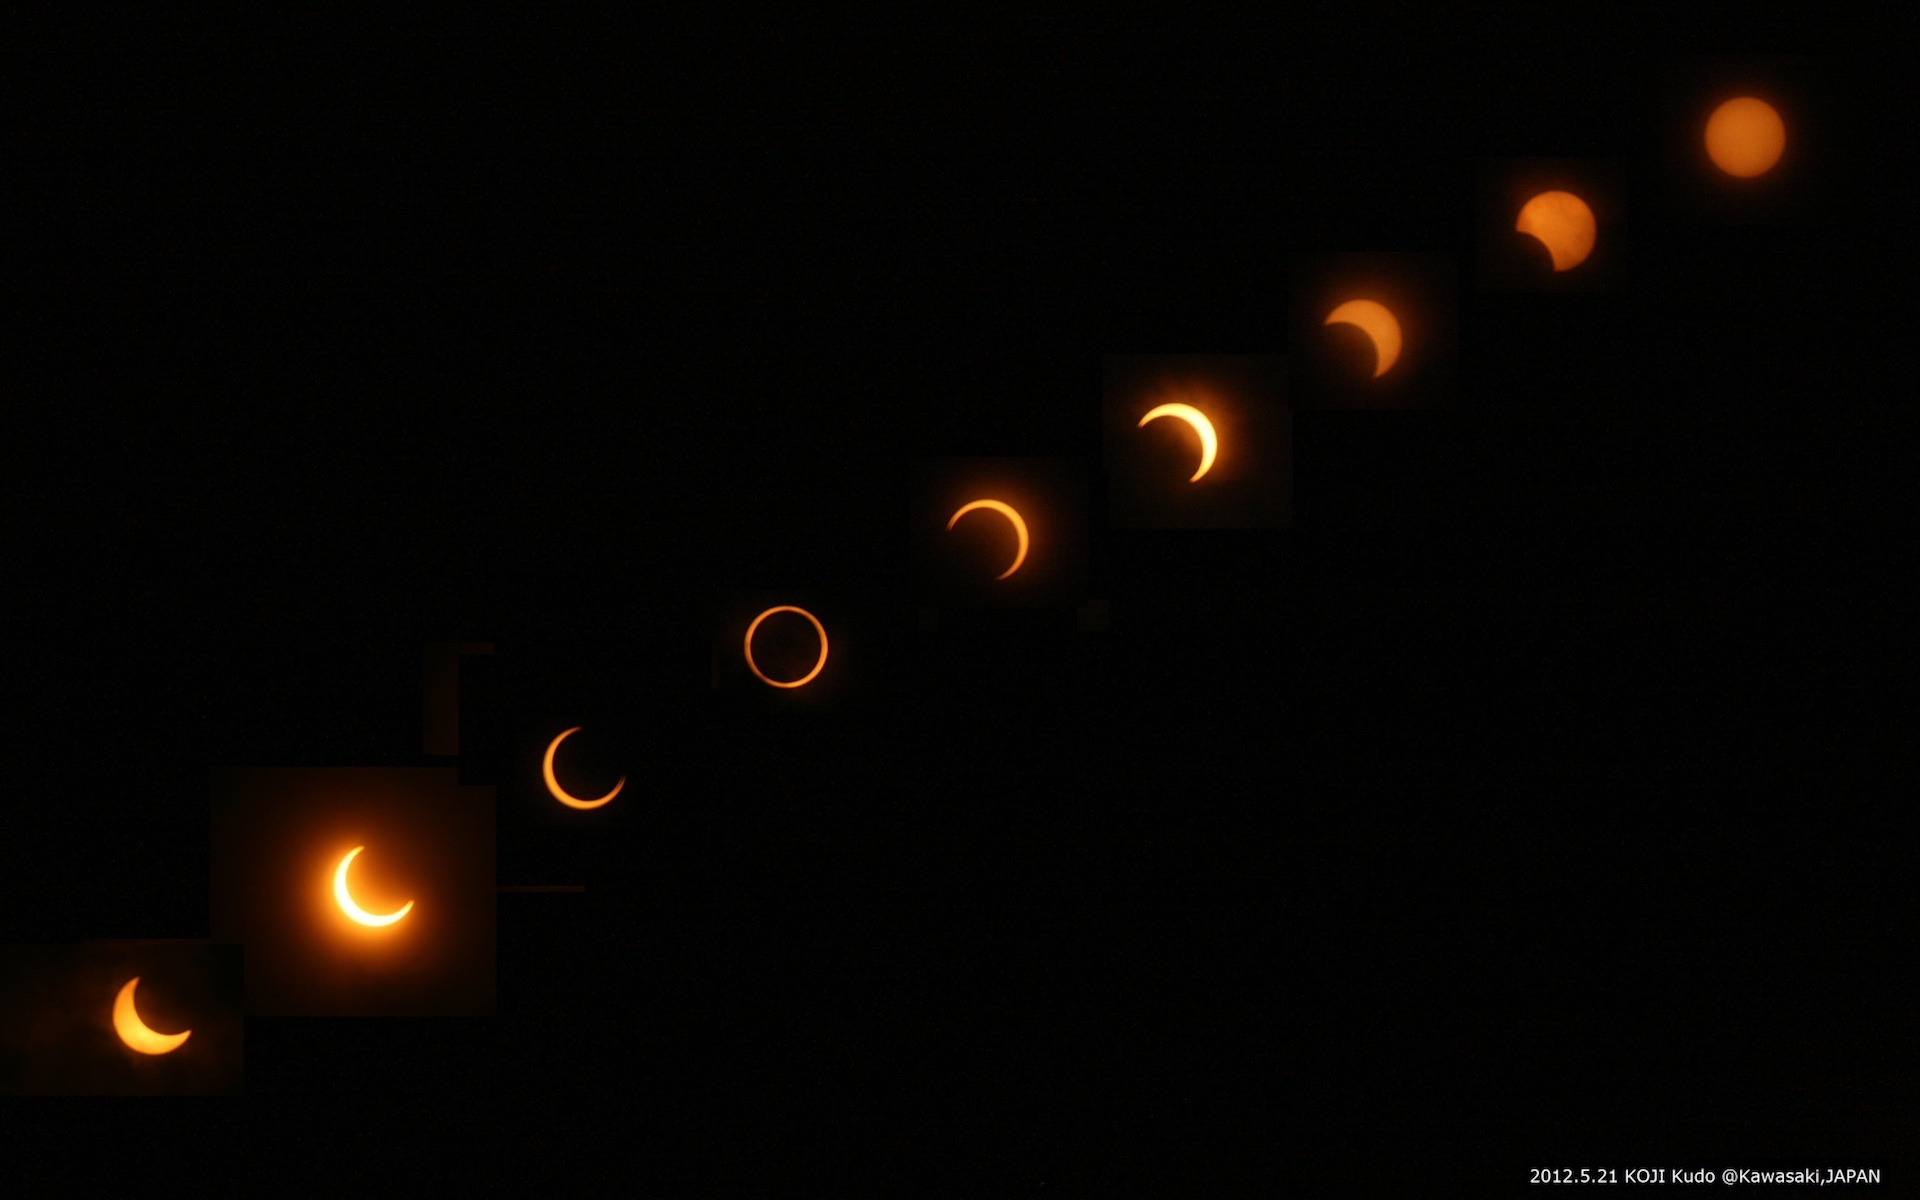 composite image showing stages of a solar eclipse.